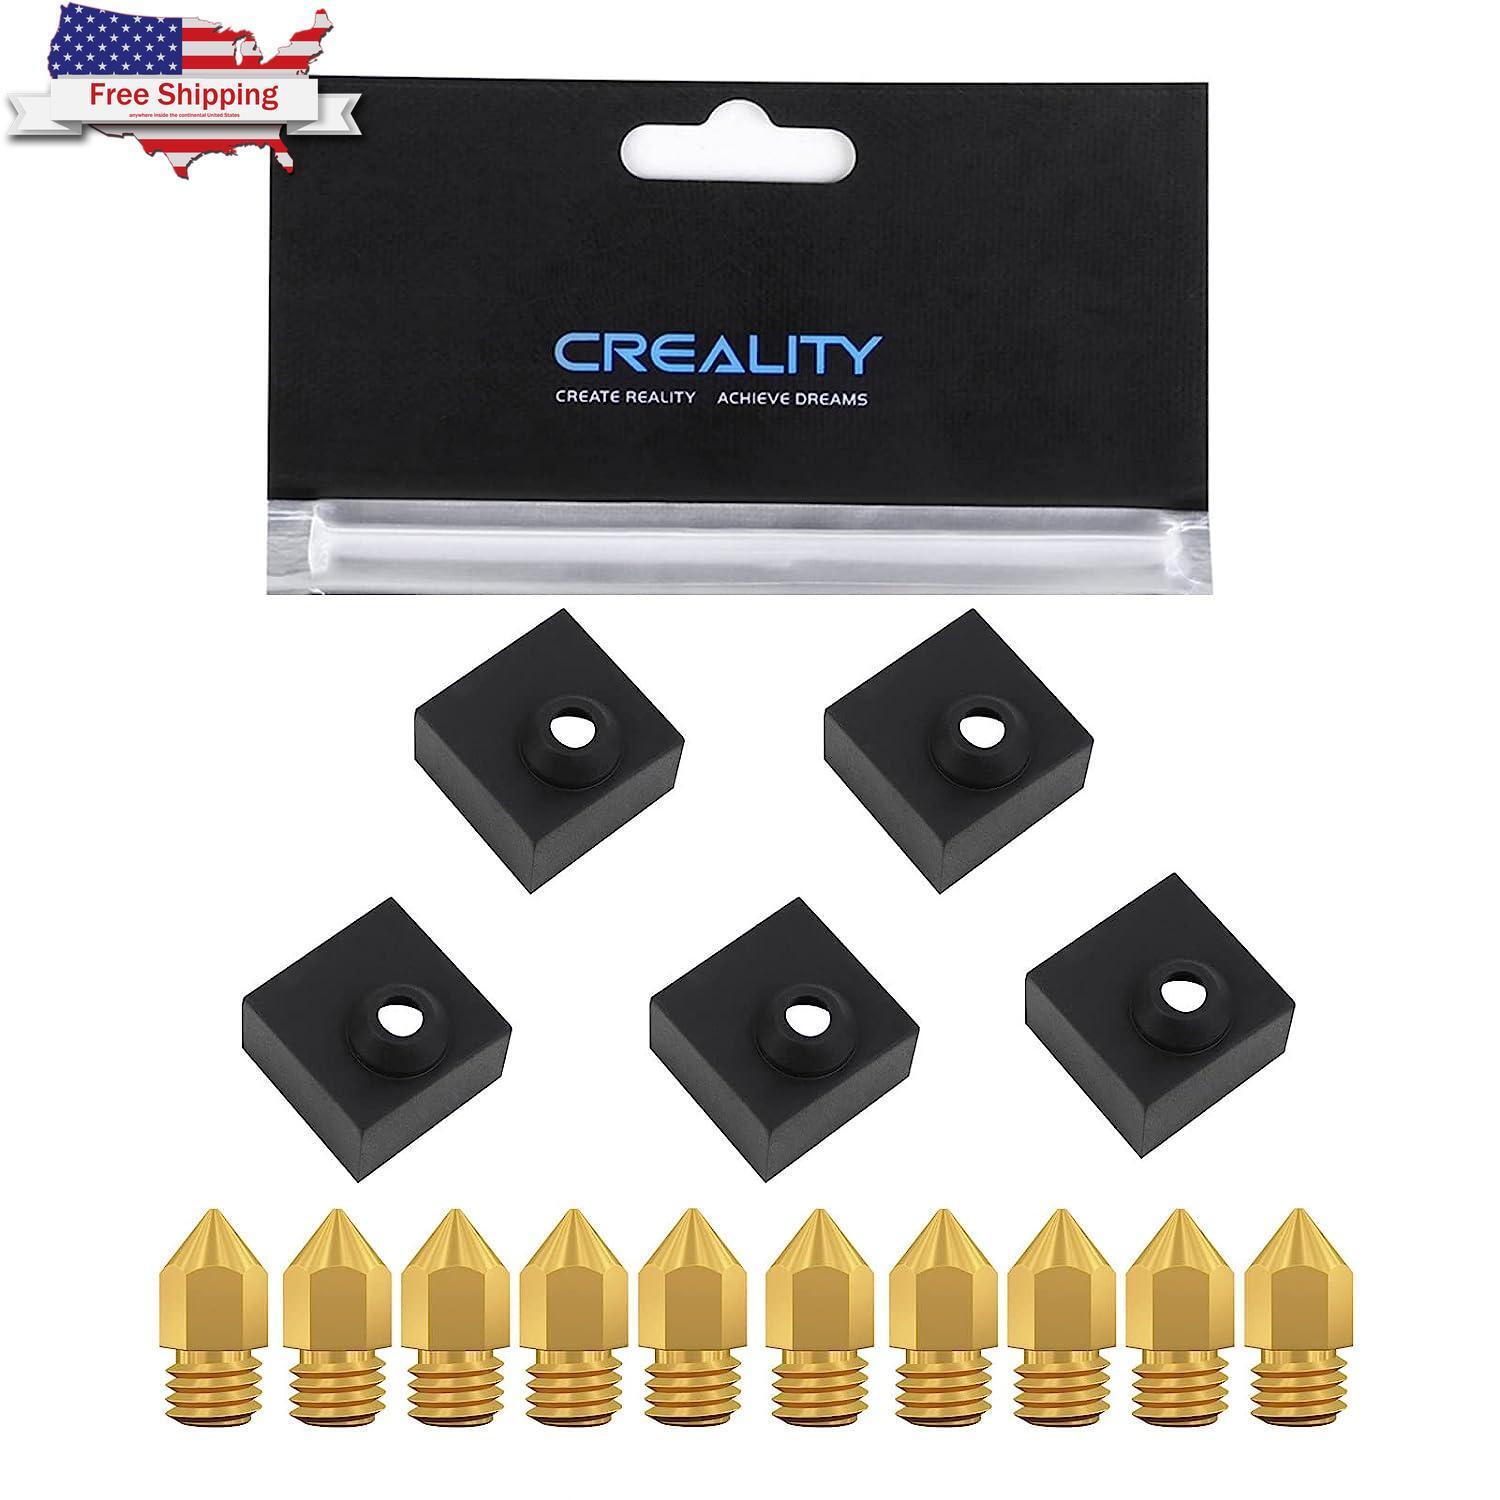 Creality Original 10pcs 0.4mm Nozzle with 5pcs Silicone Sock, for Ender 3/ender